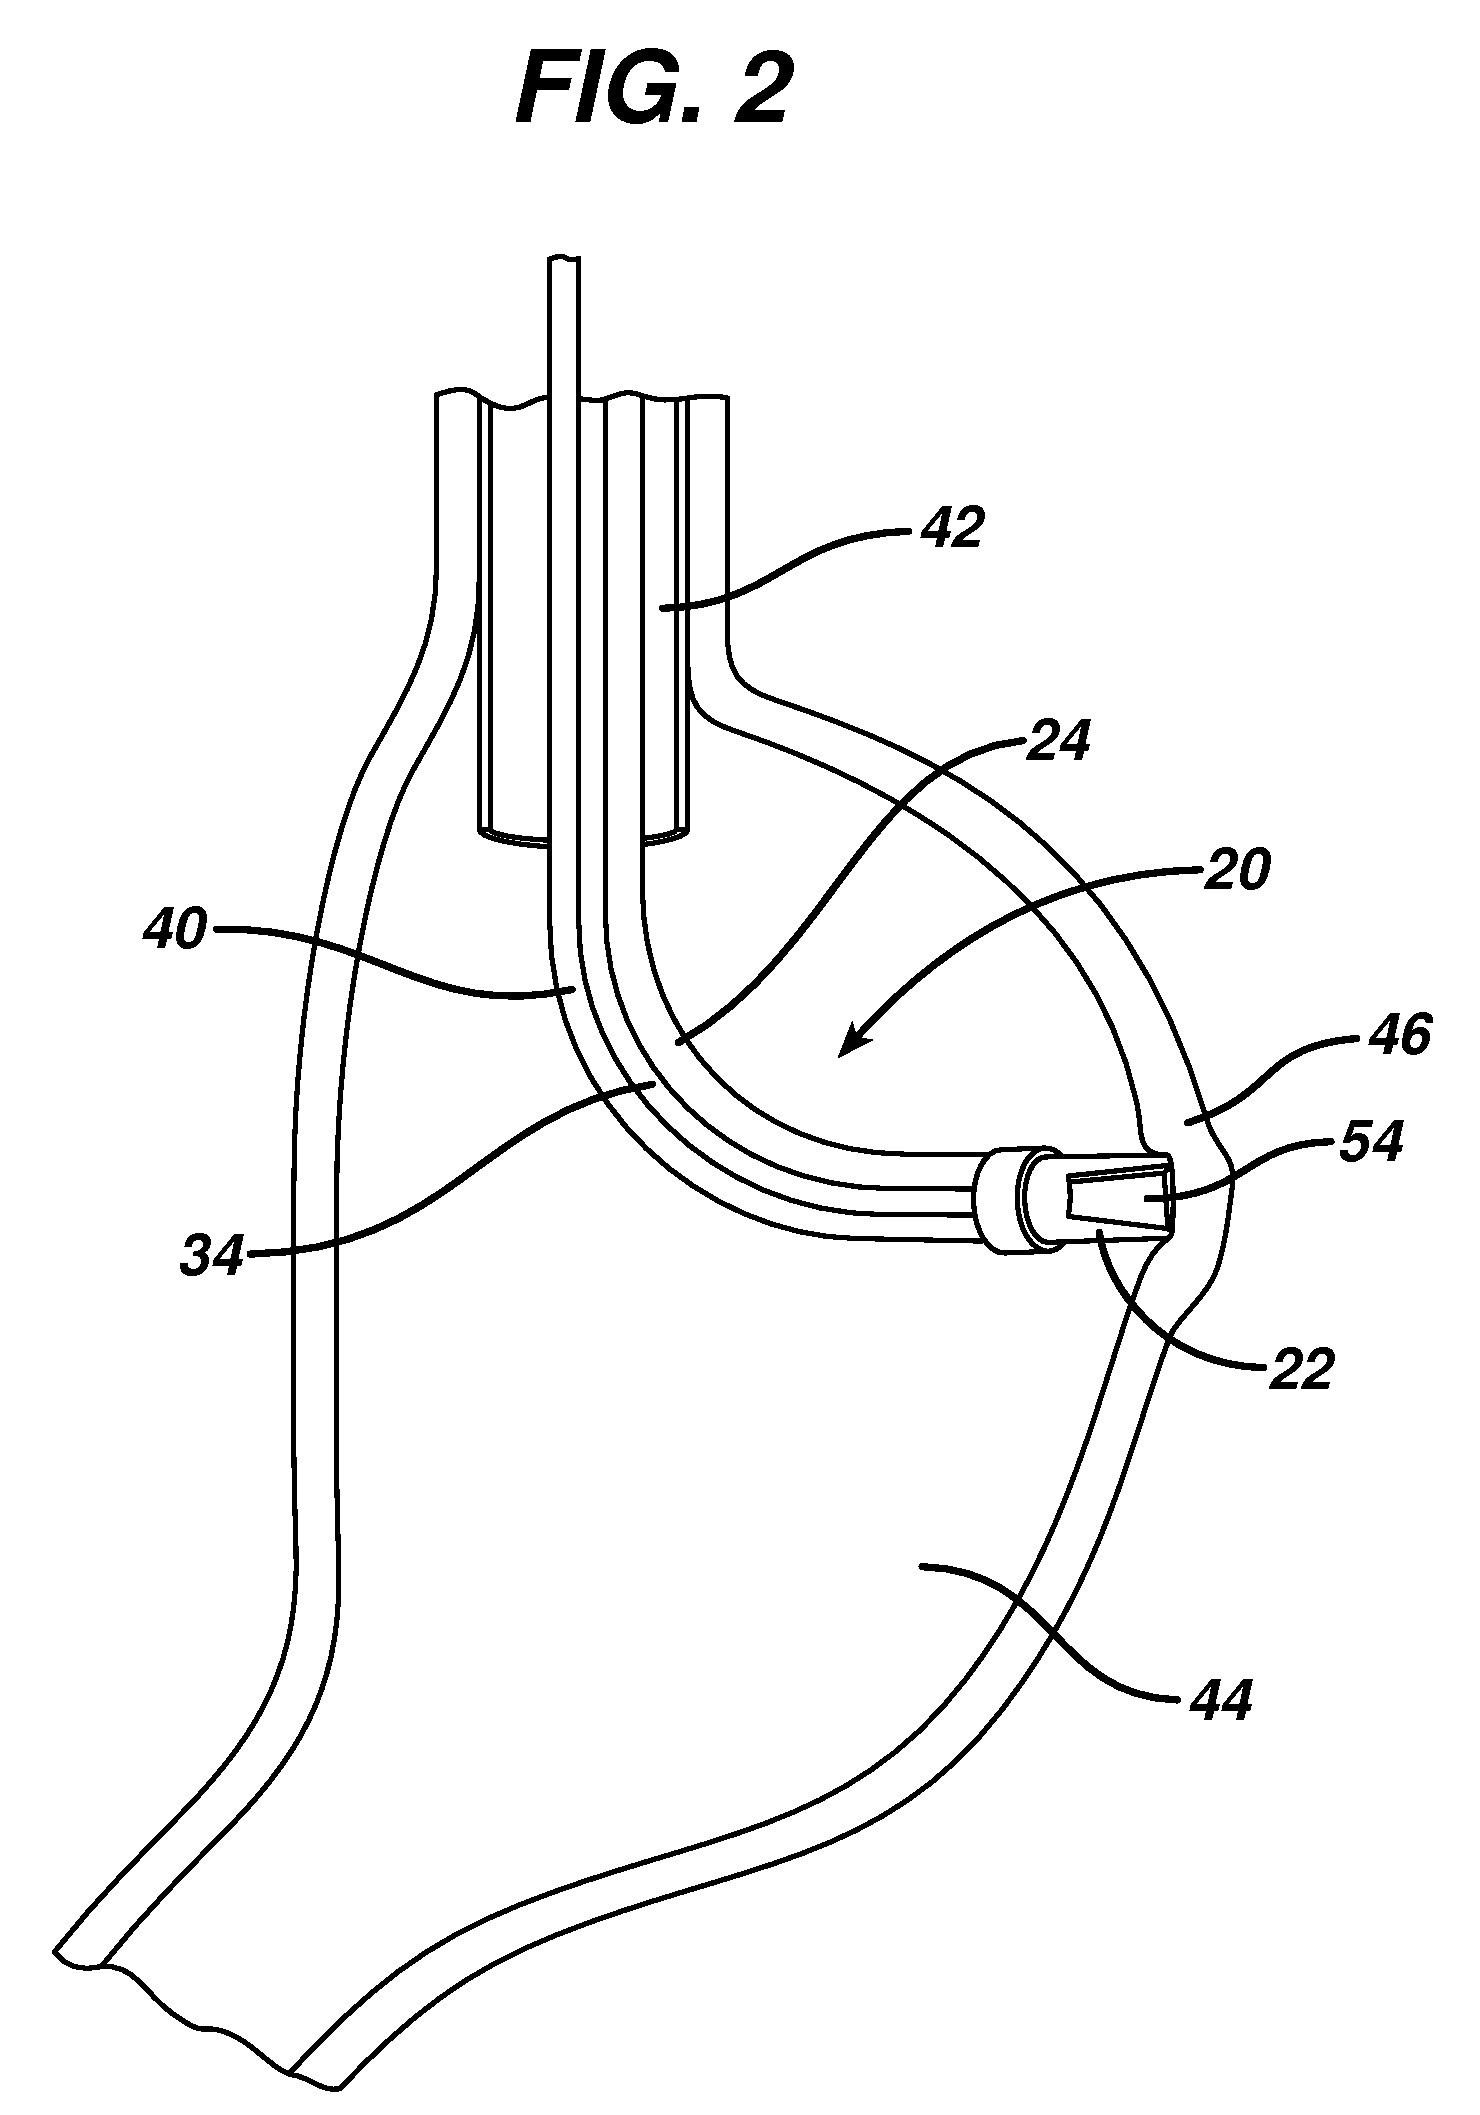 Method for plicating and fastening gastric tissue